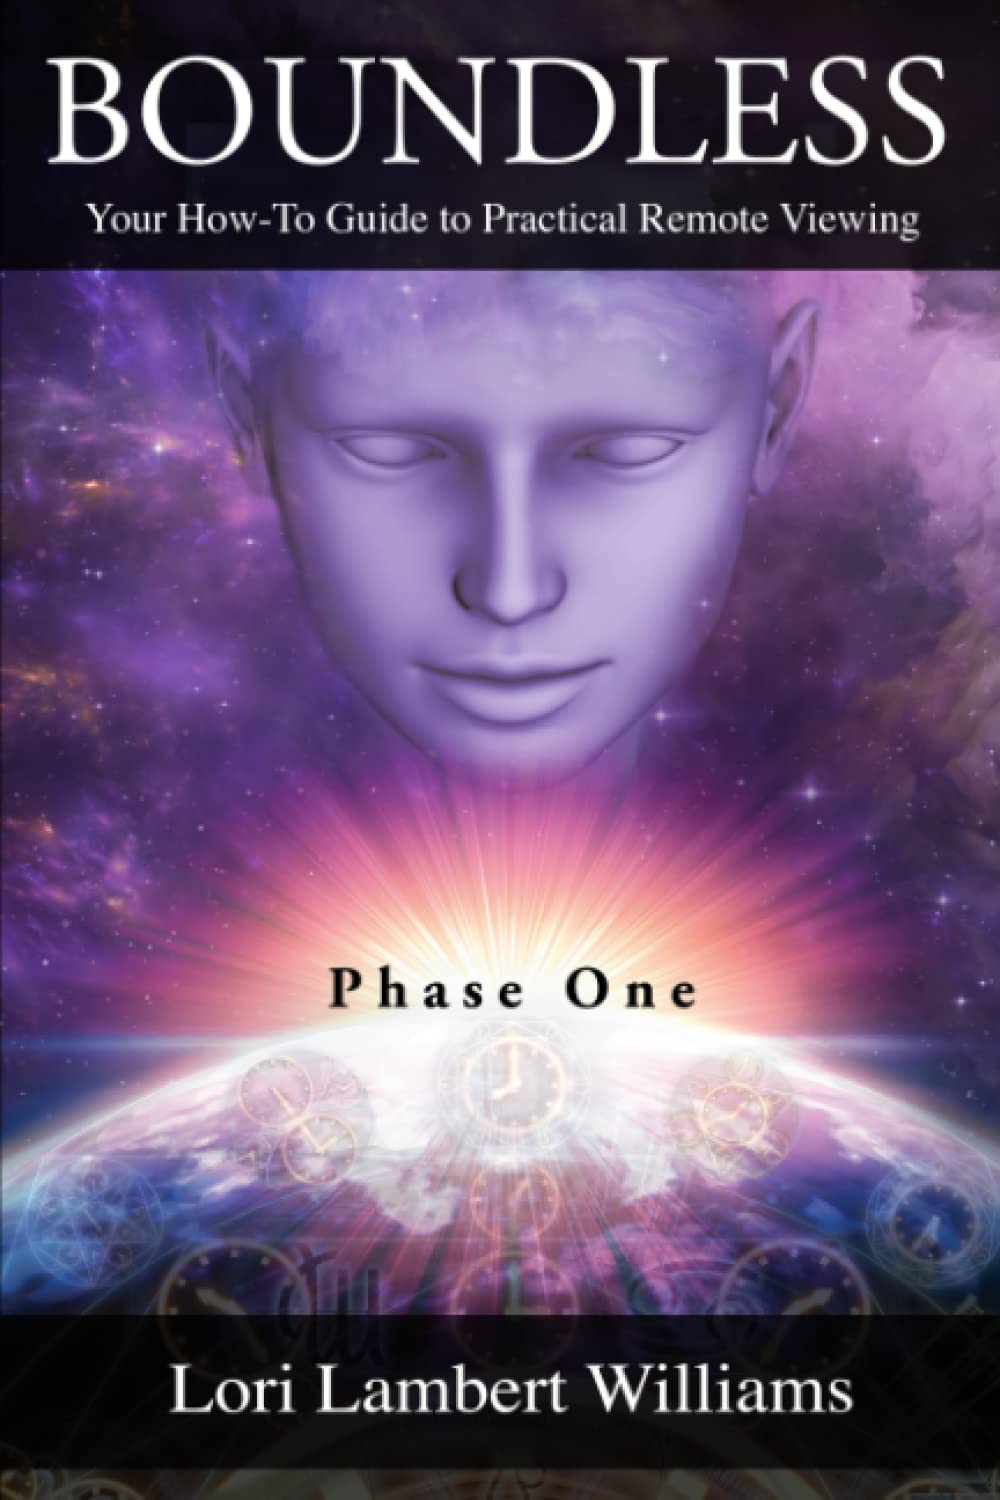 Boundless: Your How To Guide to Practical Remote Viewing - Phase One (A How To Series to Learn Controlled Remote Viewing)     Paperback – July 6, 2019